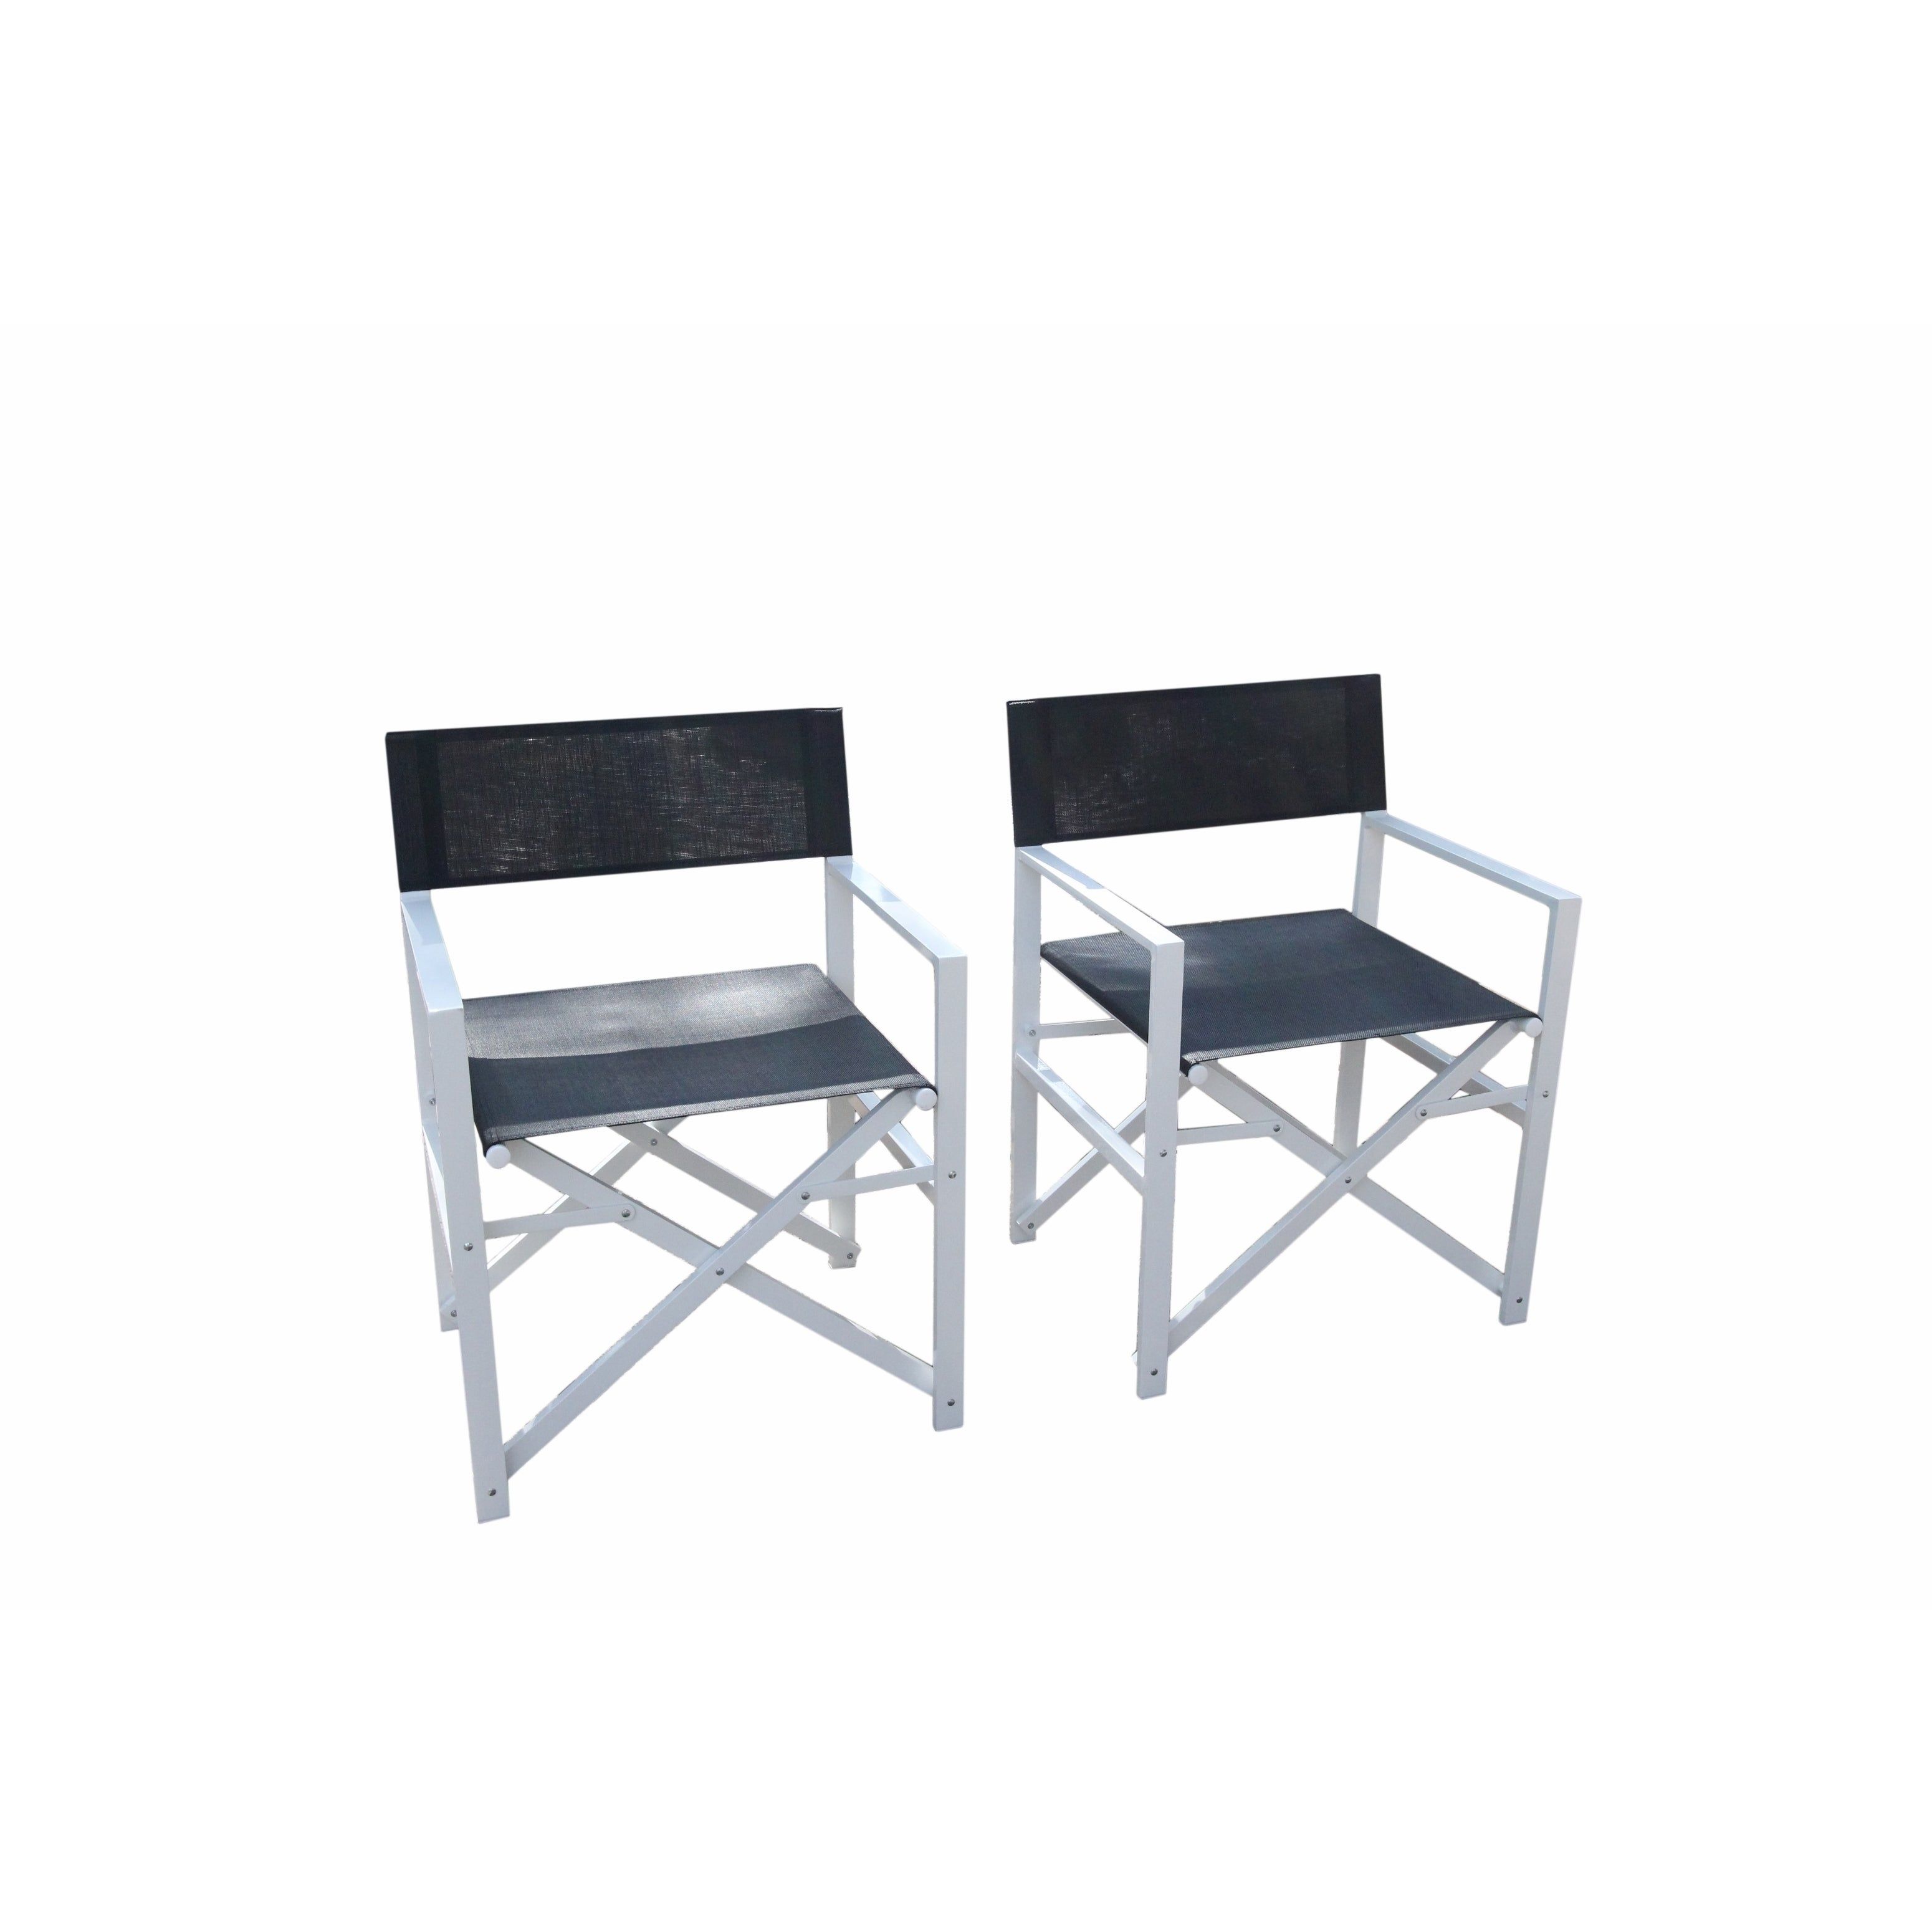 Widely Used Delmar 5 Piece Dining Sets Pertaining To Shop Del Mar White Director Chair 5 Piece Dining Set – Free Shipping (View 15 of 20)